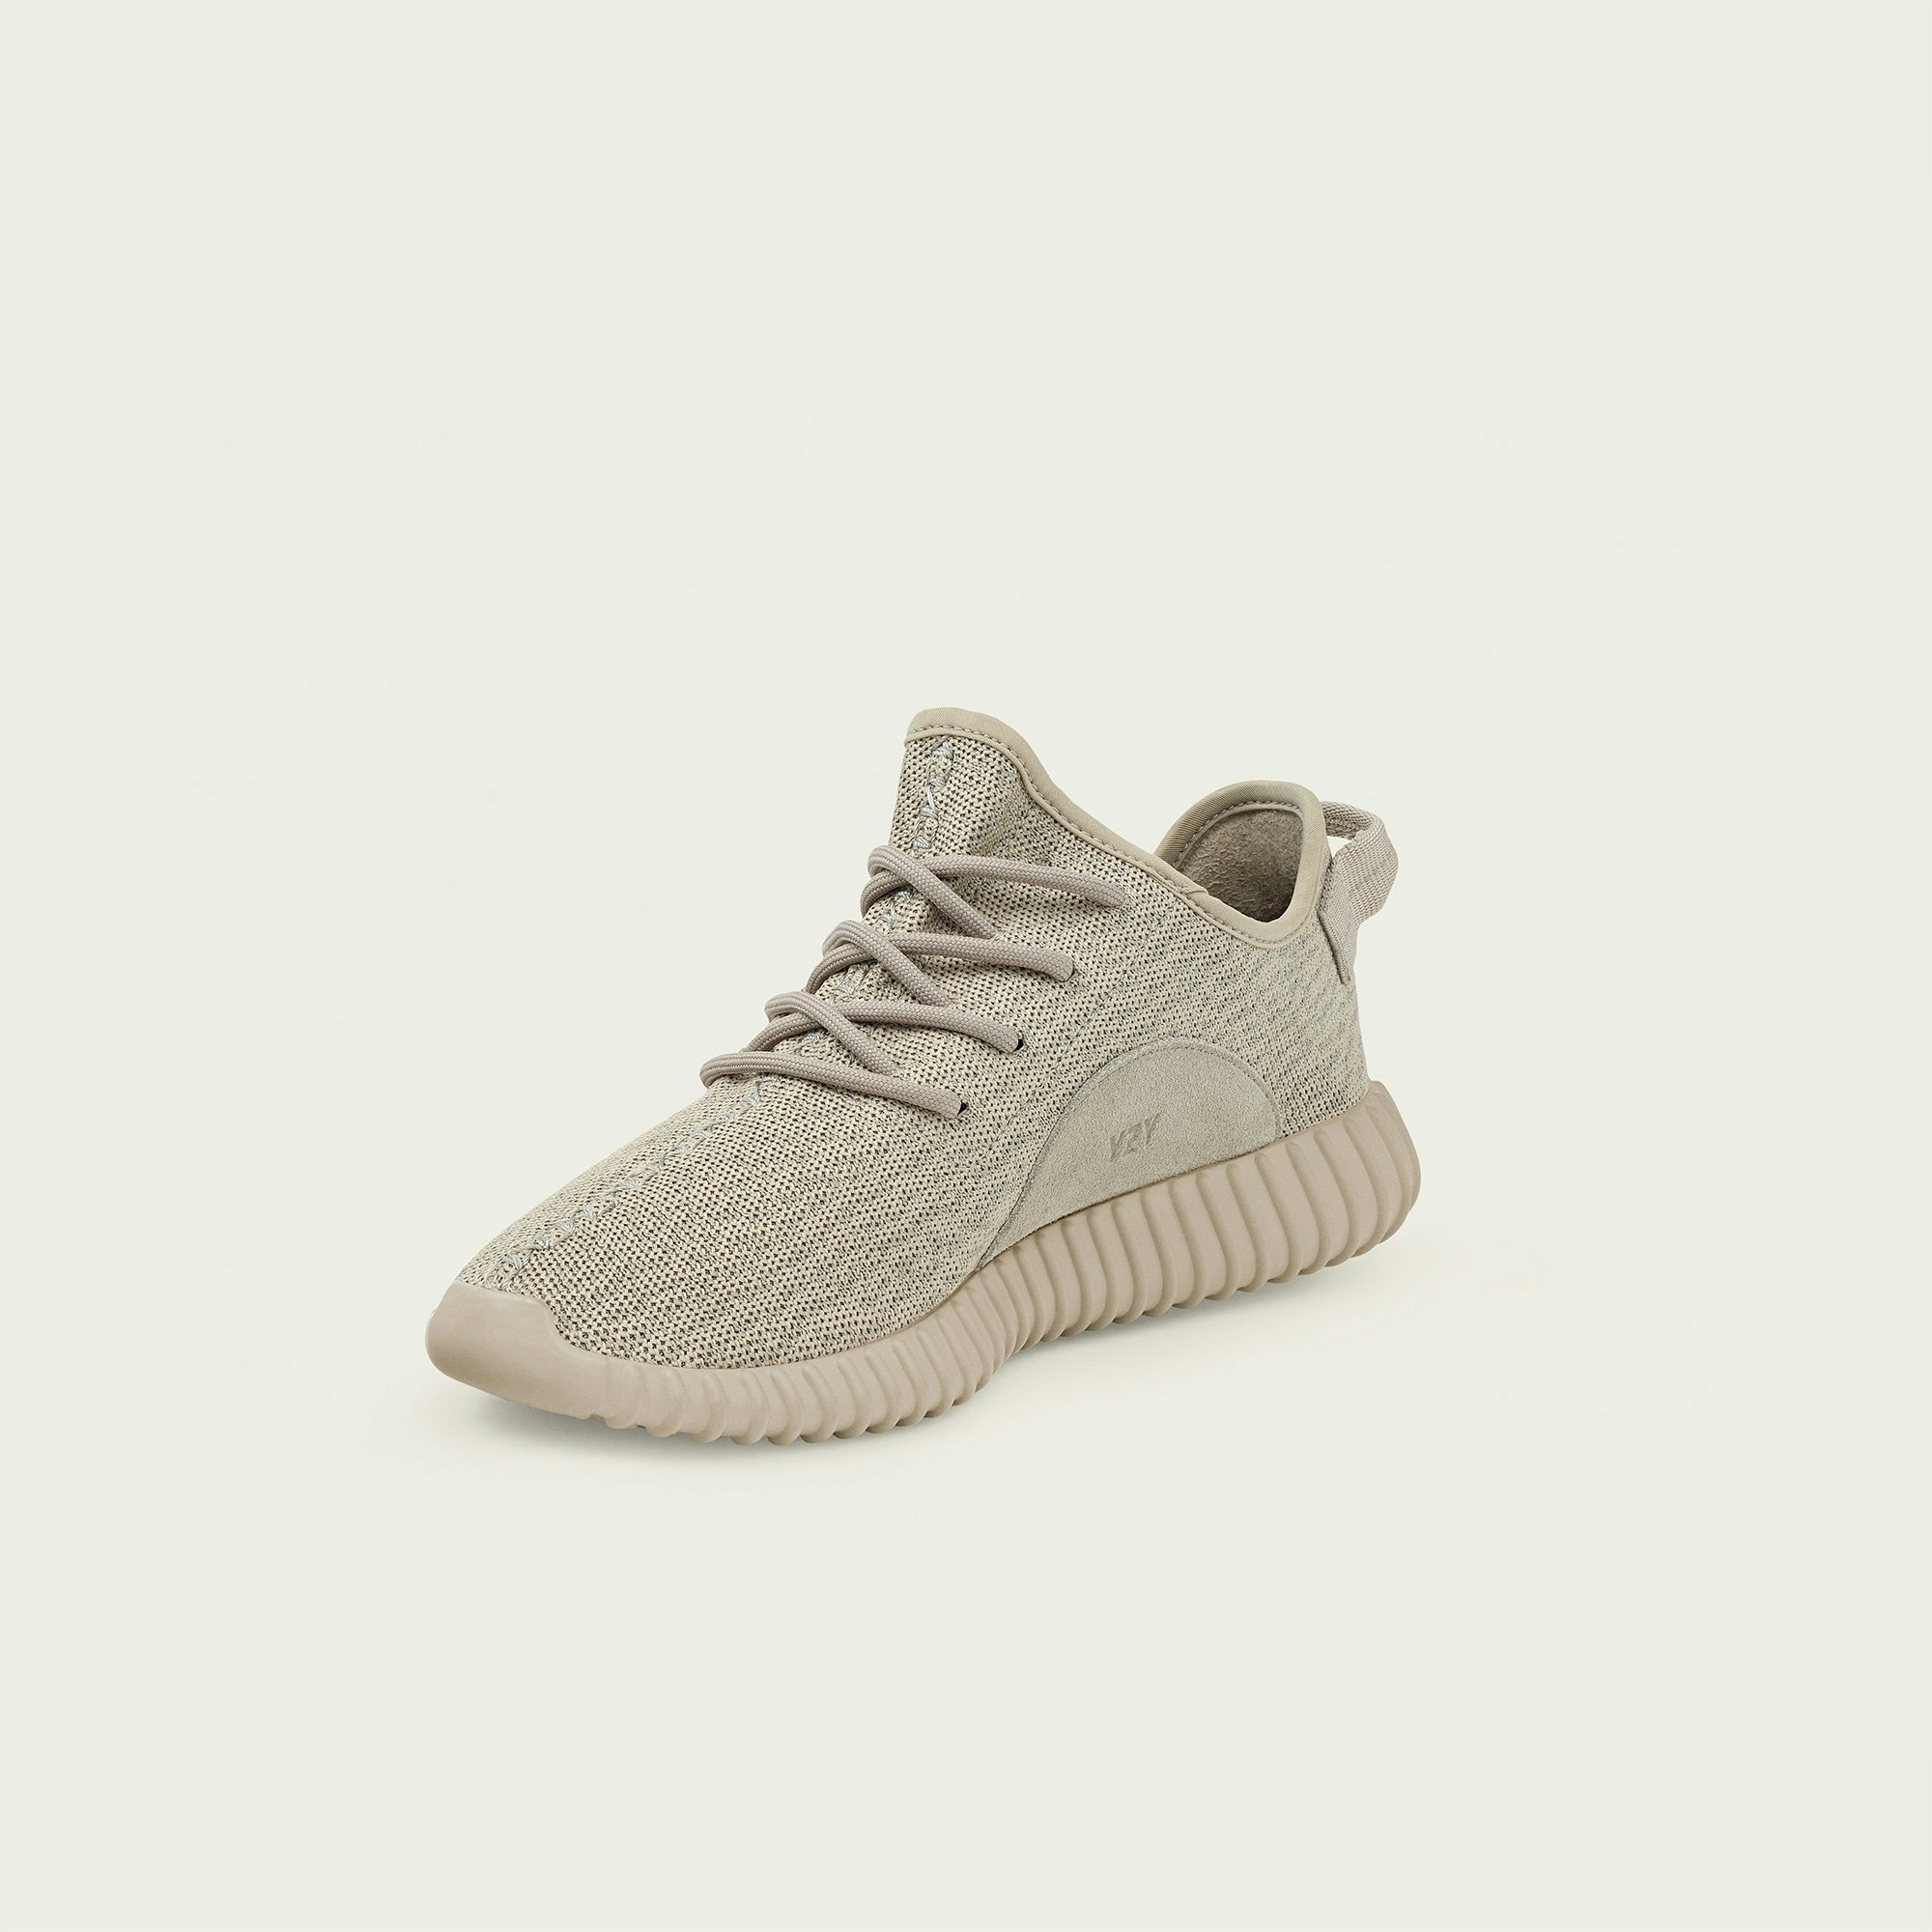 What Malls Carry Yeezy 350 Boosts? Here 